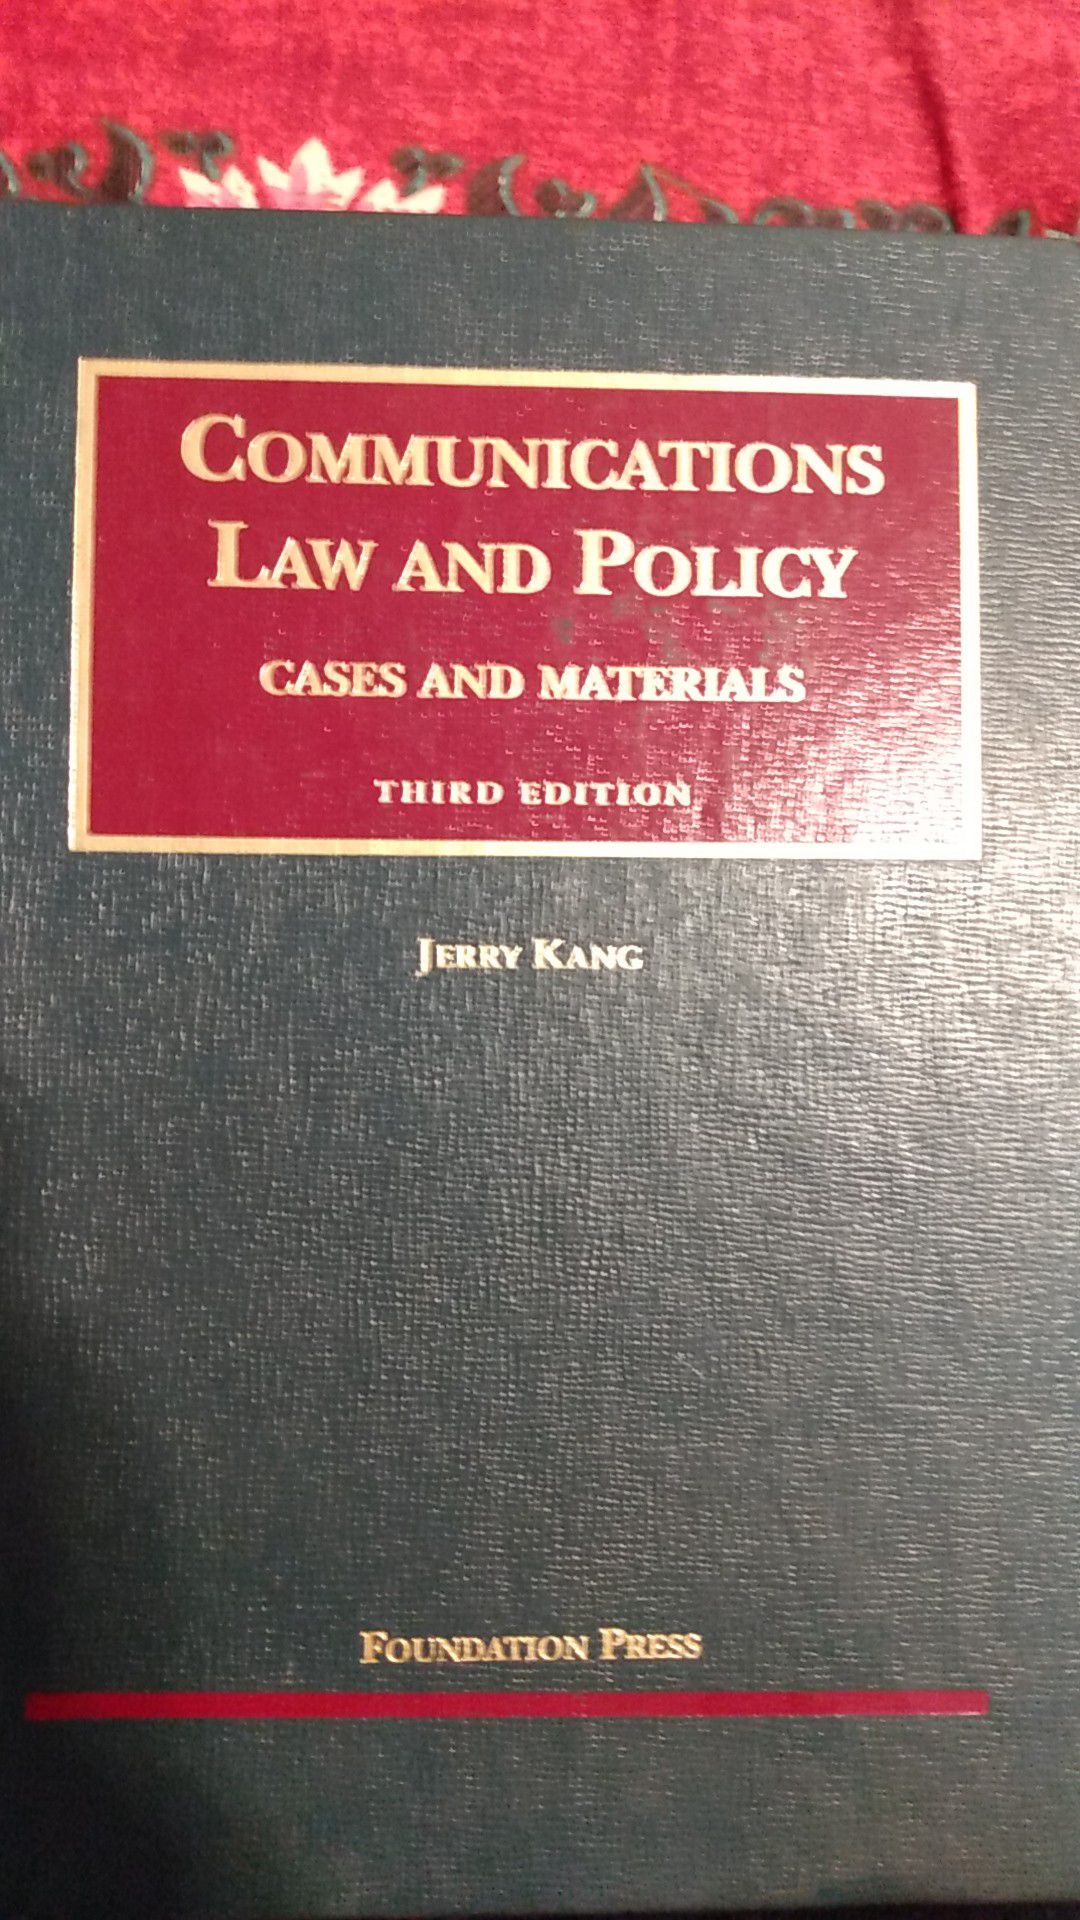 Communications law & policy Book